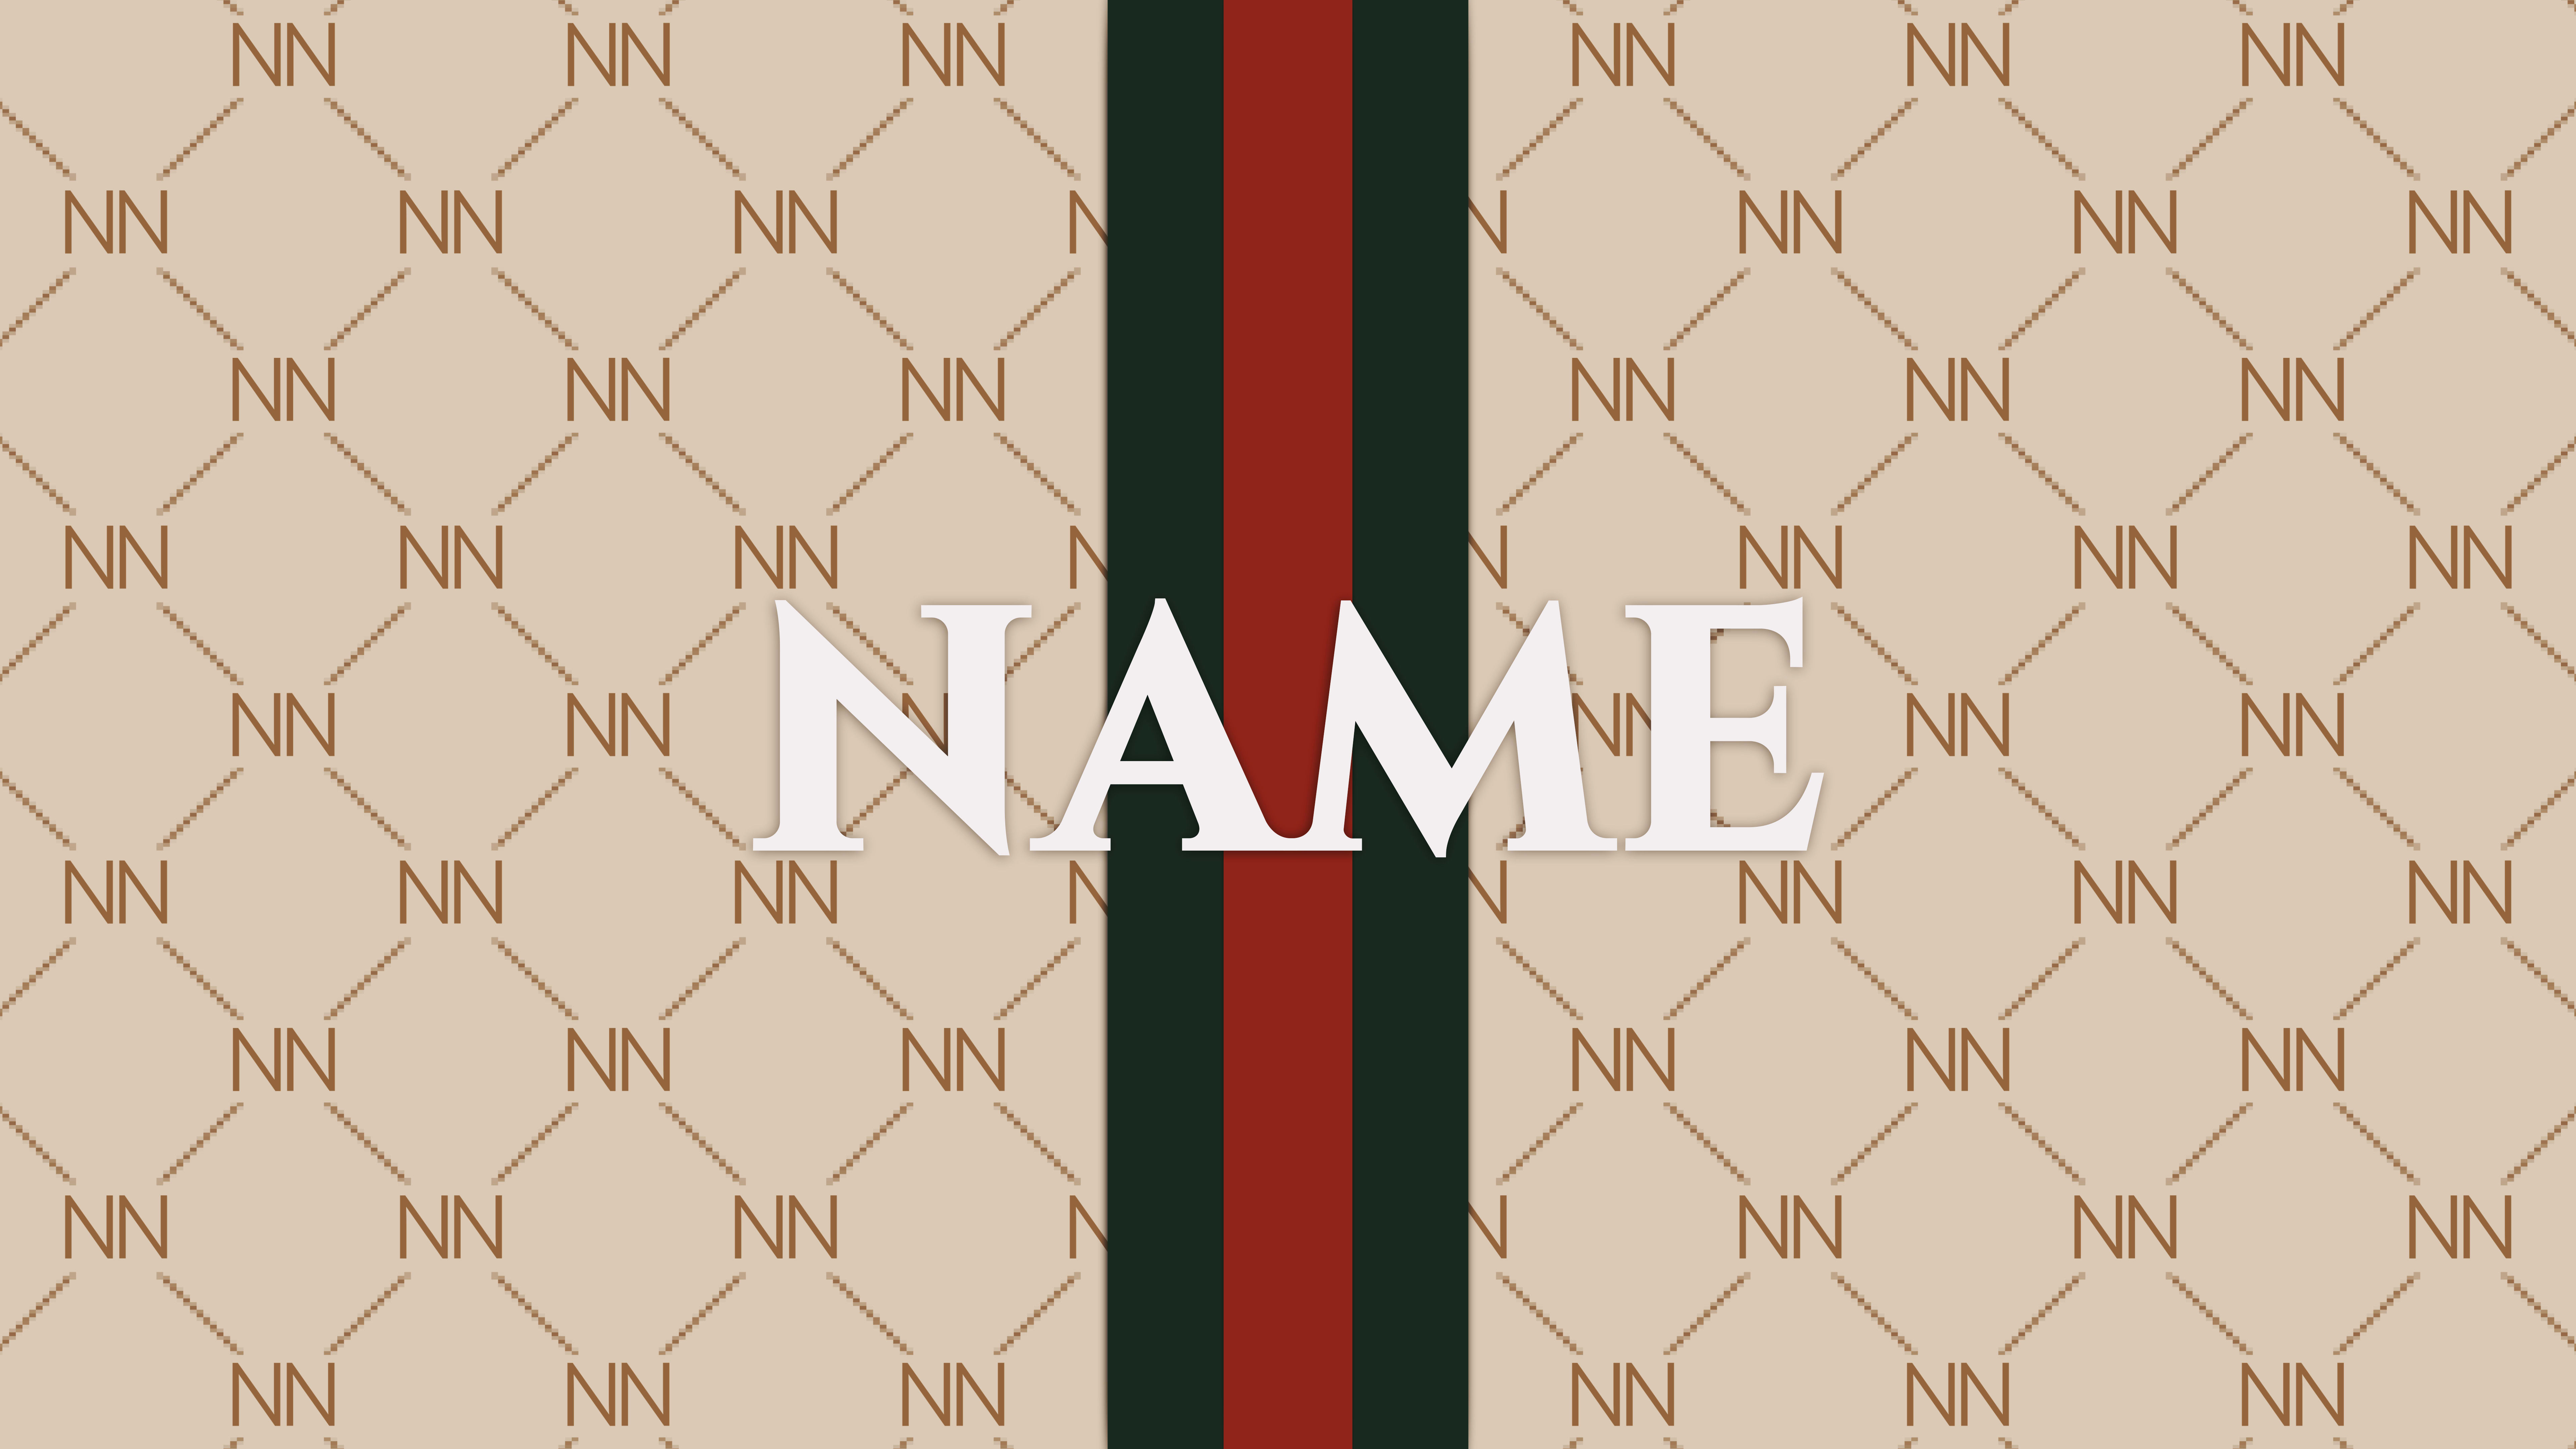 Make a gucci monogram banner and 8k by Neekyzy | Fiverr